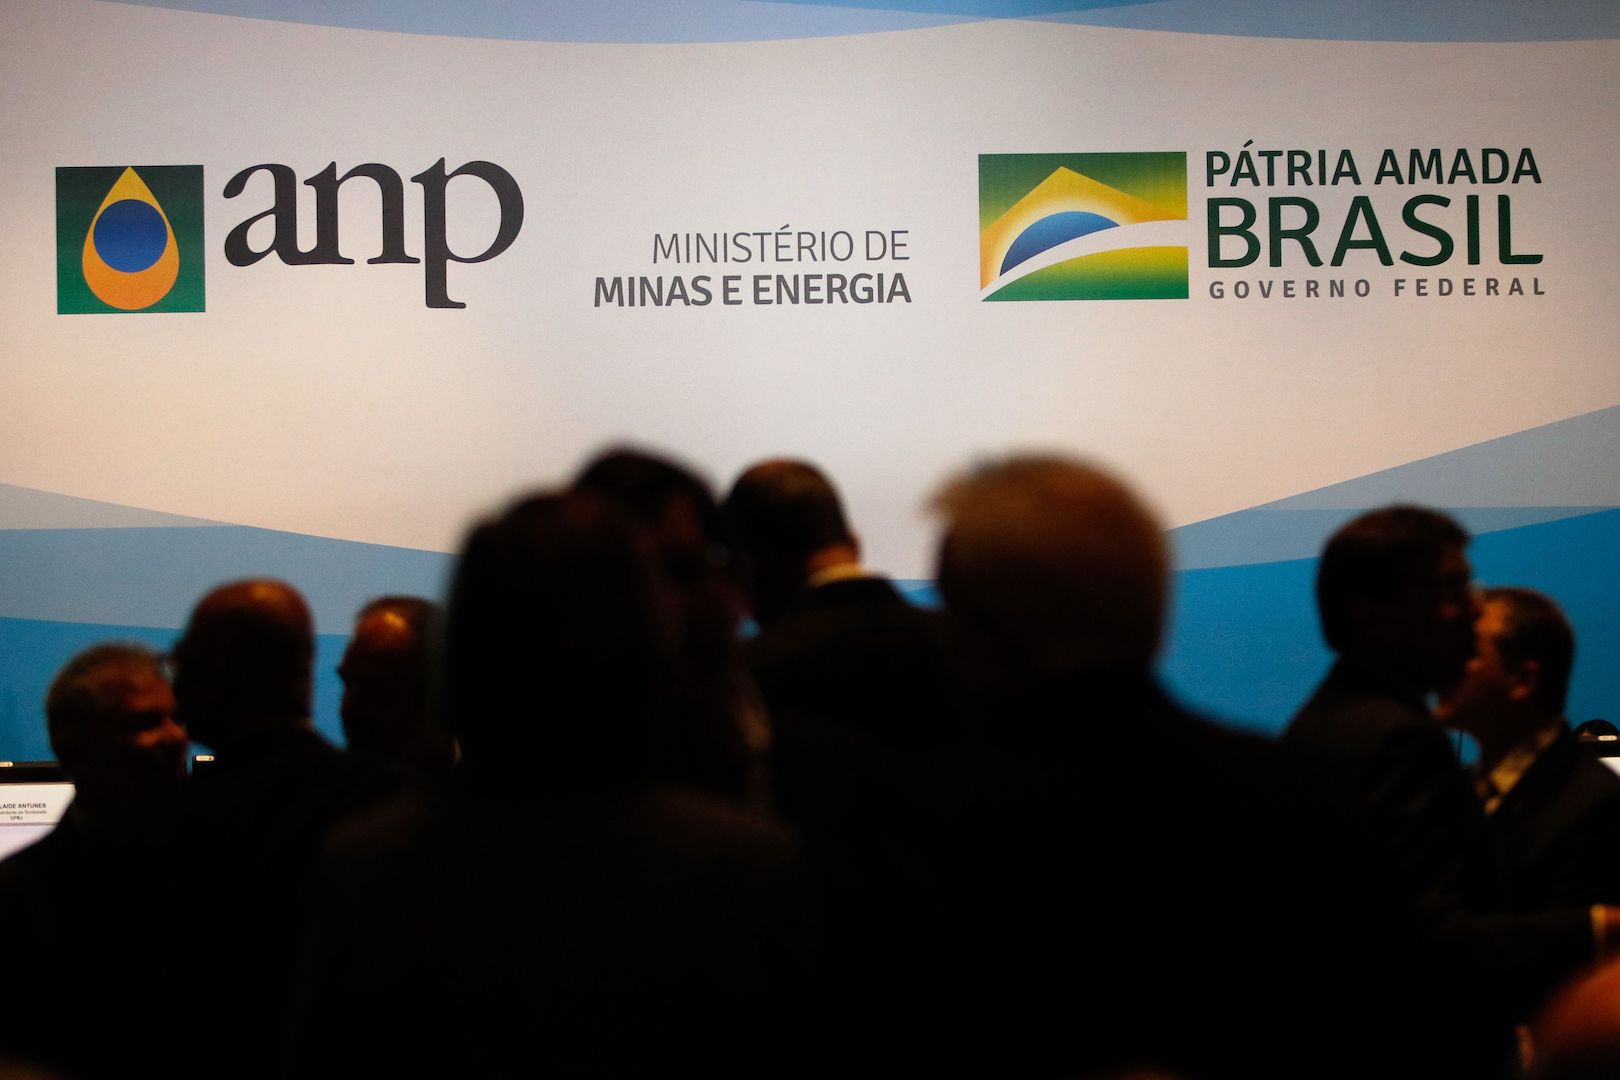 Brazil,The two auctions last week by Brazil's Petroleum Agency (ANP) were seen as disappointing.